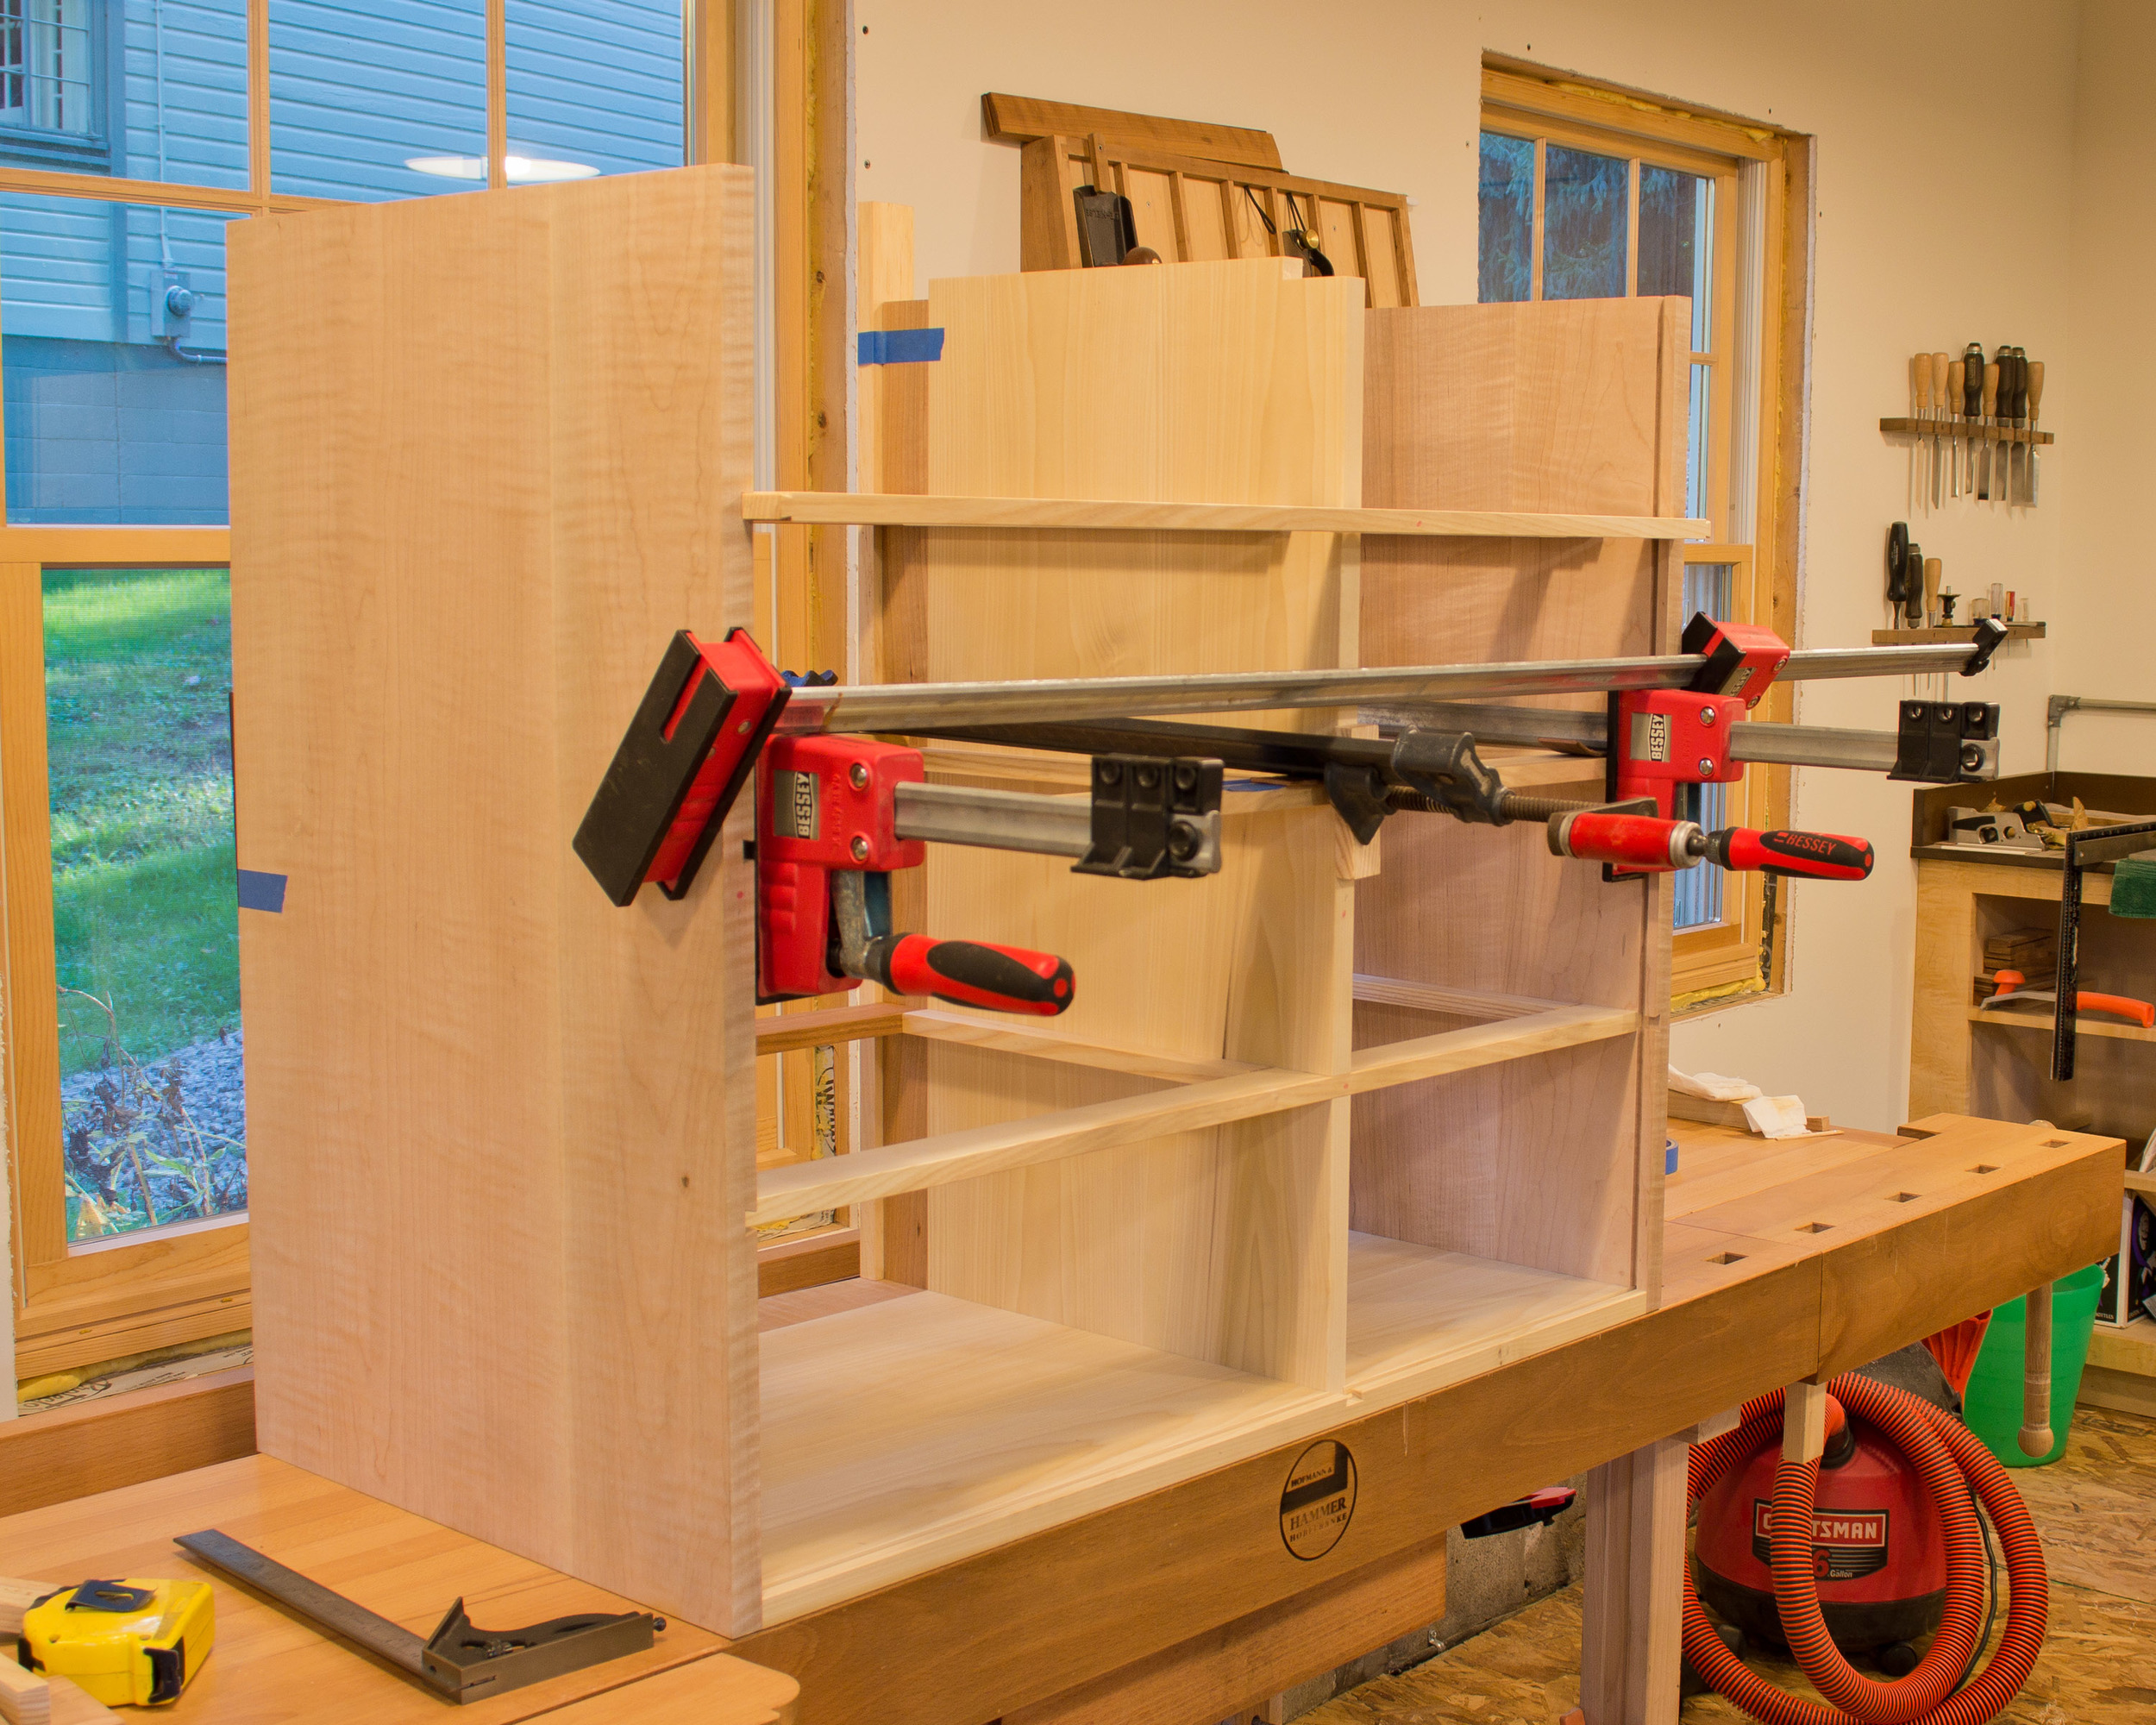  I'm using clamps to pull &nbsp;one of the rear horizontal dividers into position. &nbsp;Again, sliding dovetails and half laps. 